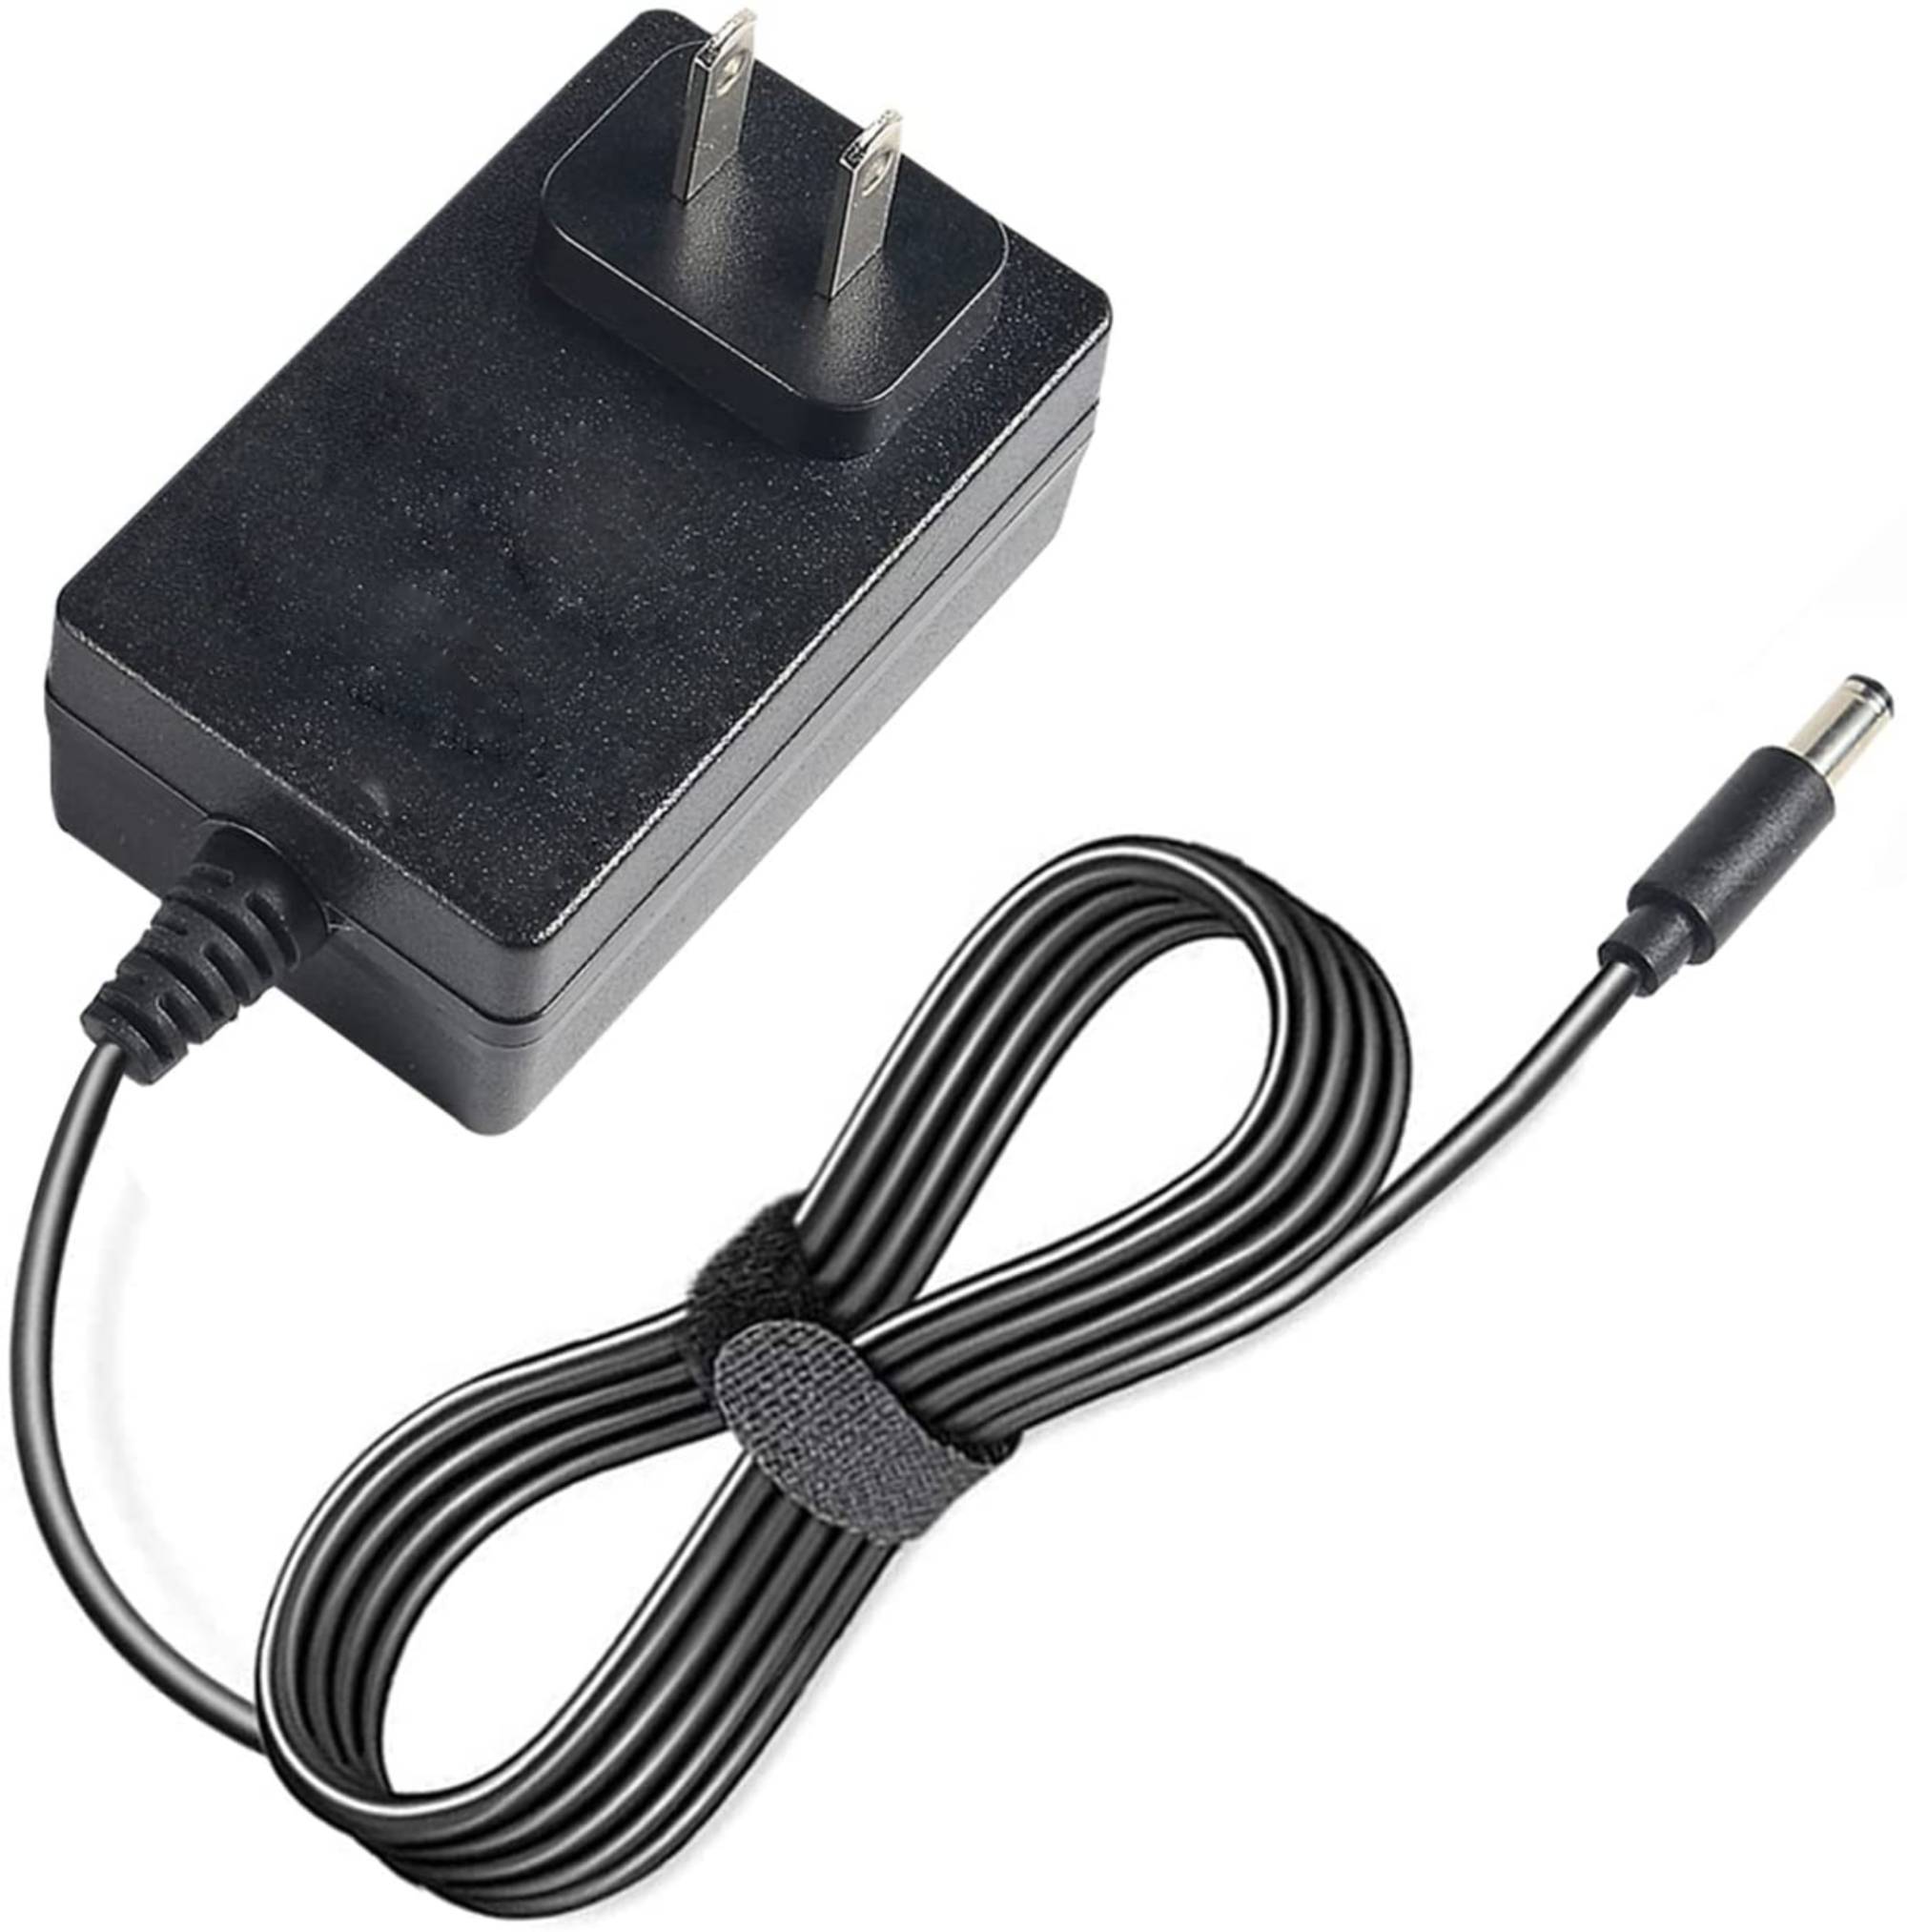 Omilik AC-DC Adapter compatible with Pyle PTVLED23 PTVDLED24 23.6 LED TV HD Flat Screen TV Power - image 1 of 3